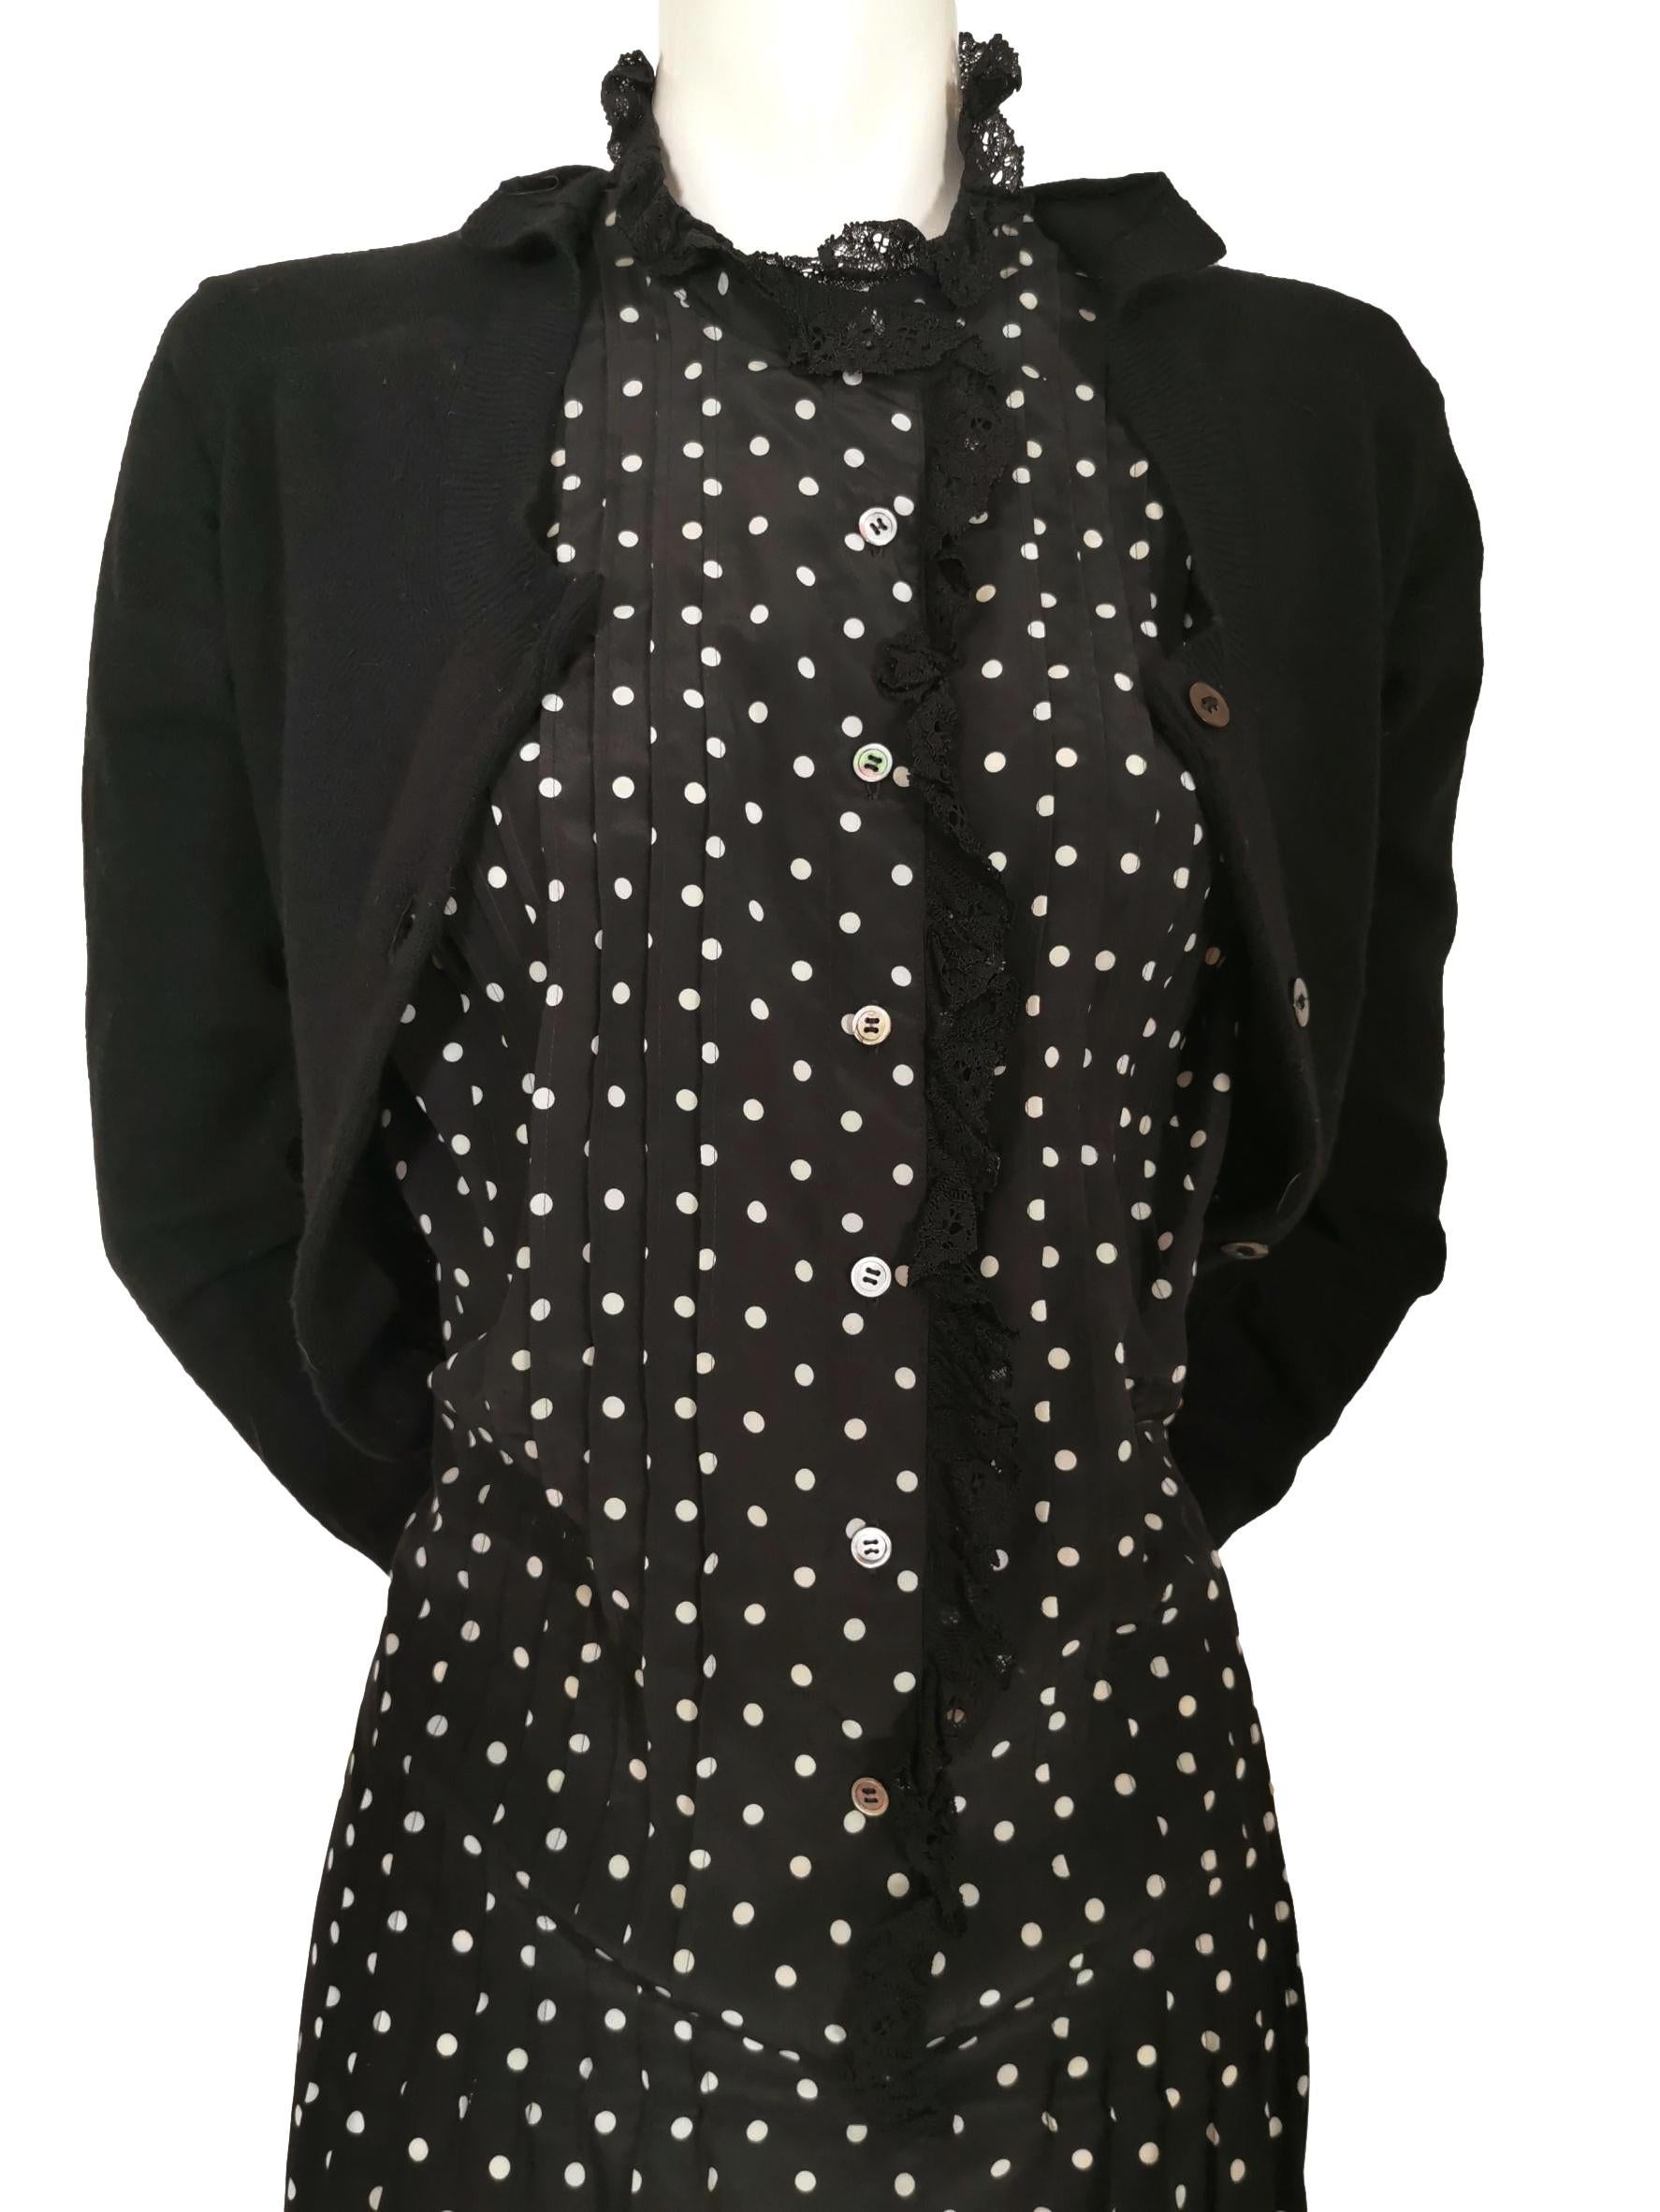 Junya Watanabe Comme des Garcons Twisted Polka Dot Cardigan Dress AD 2007 For Sale 8